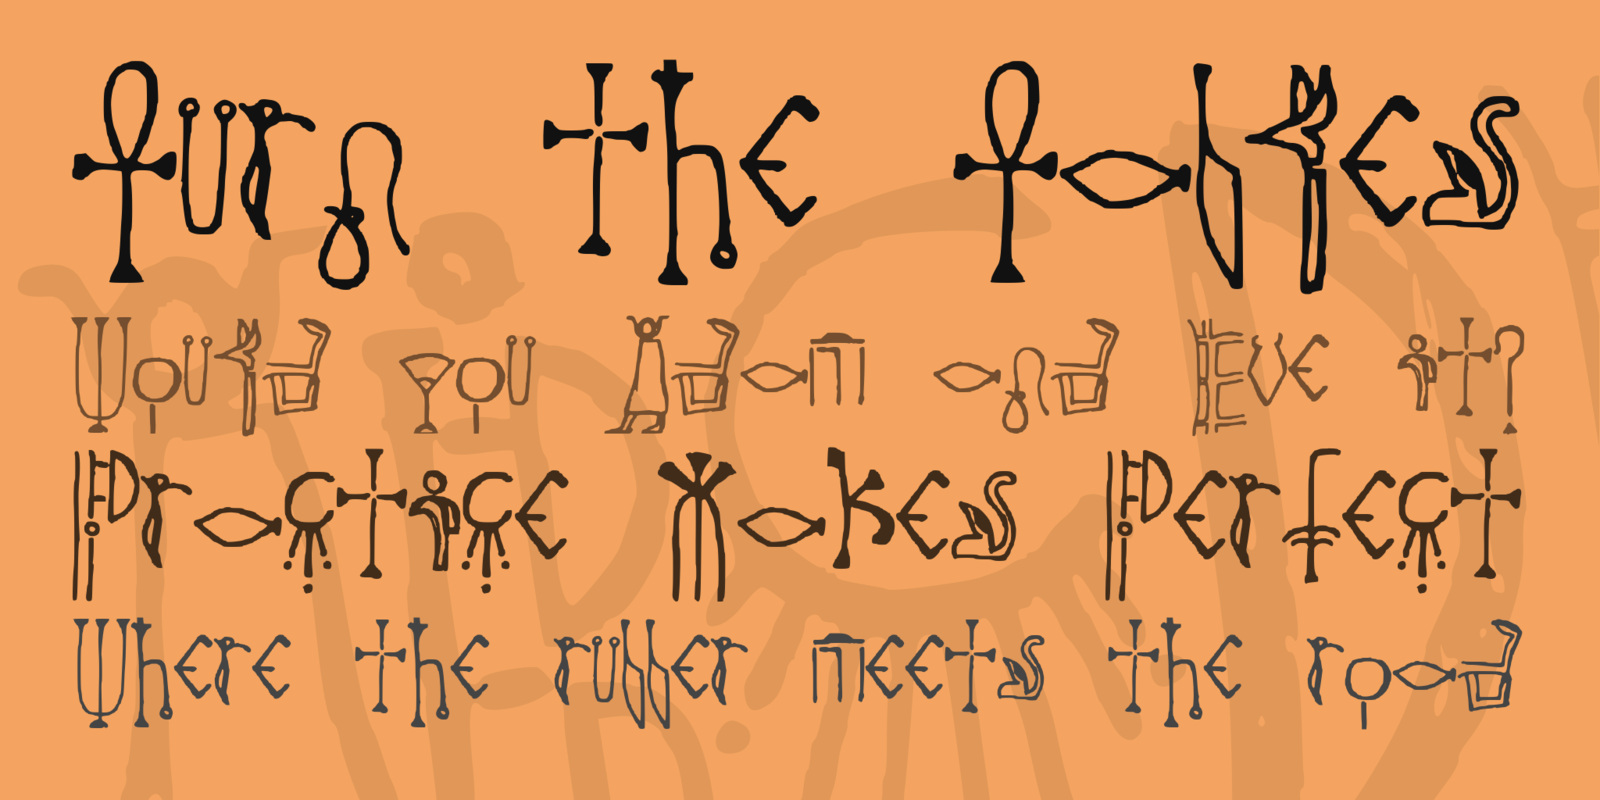 Download Free Throne Of Egypt Font Download Free For Desktop Webfont Fonts Typography